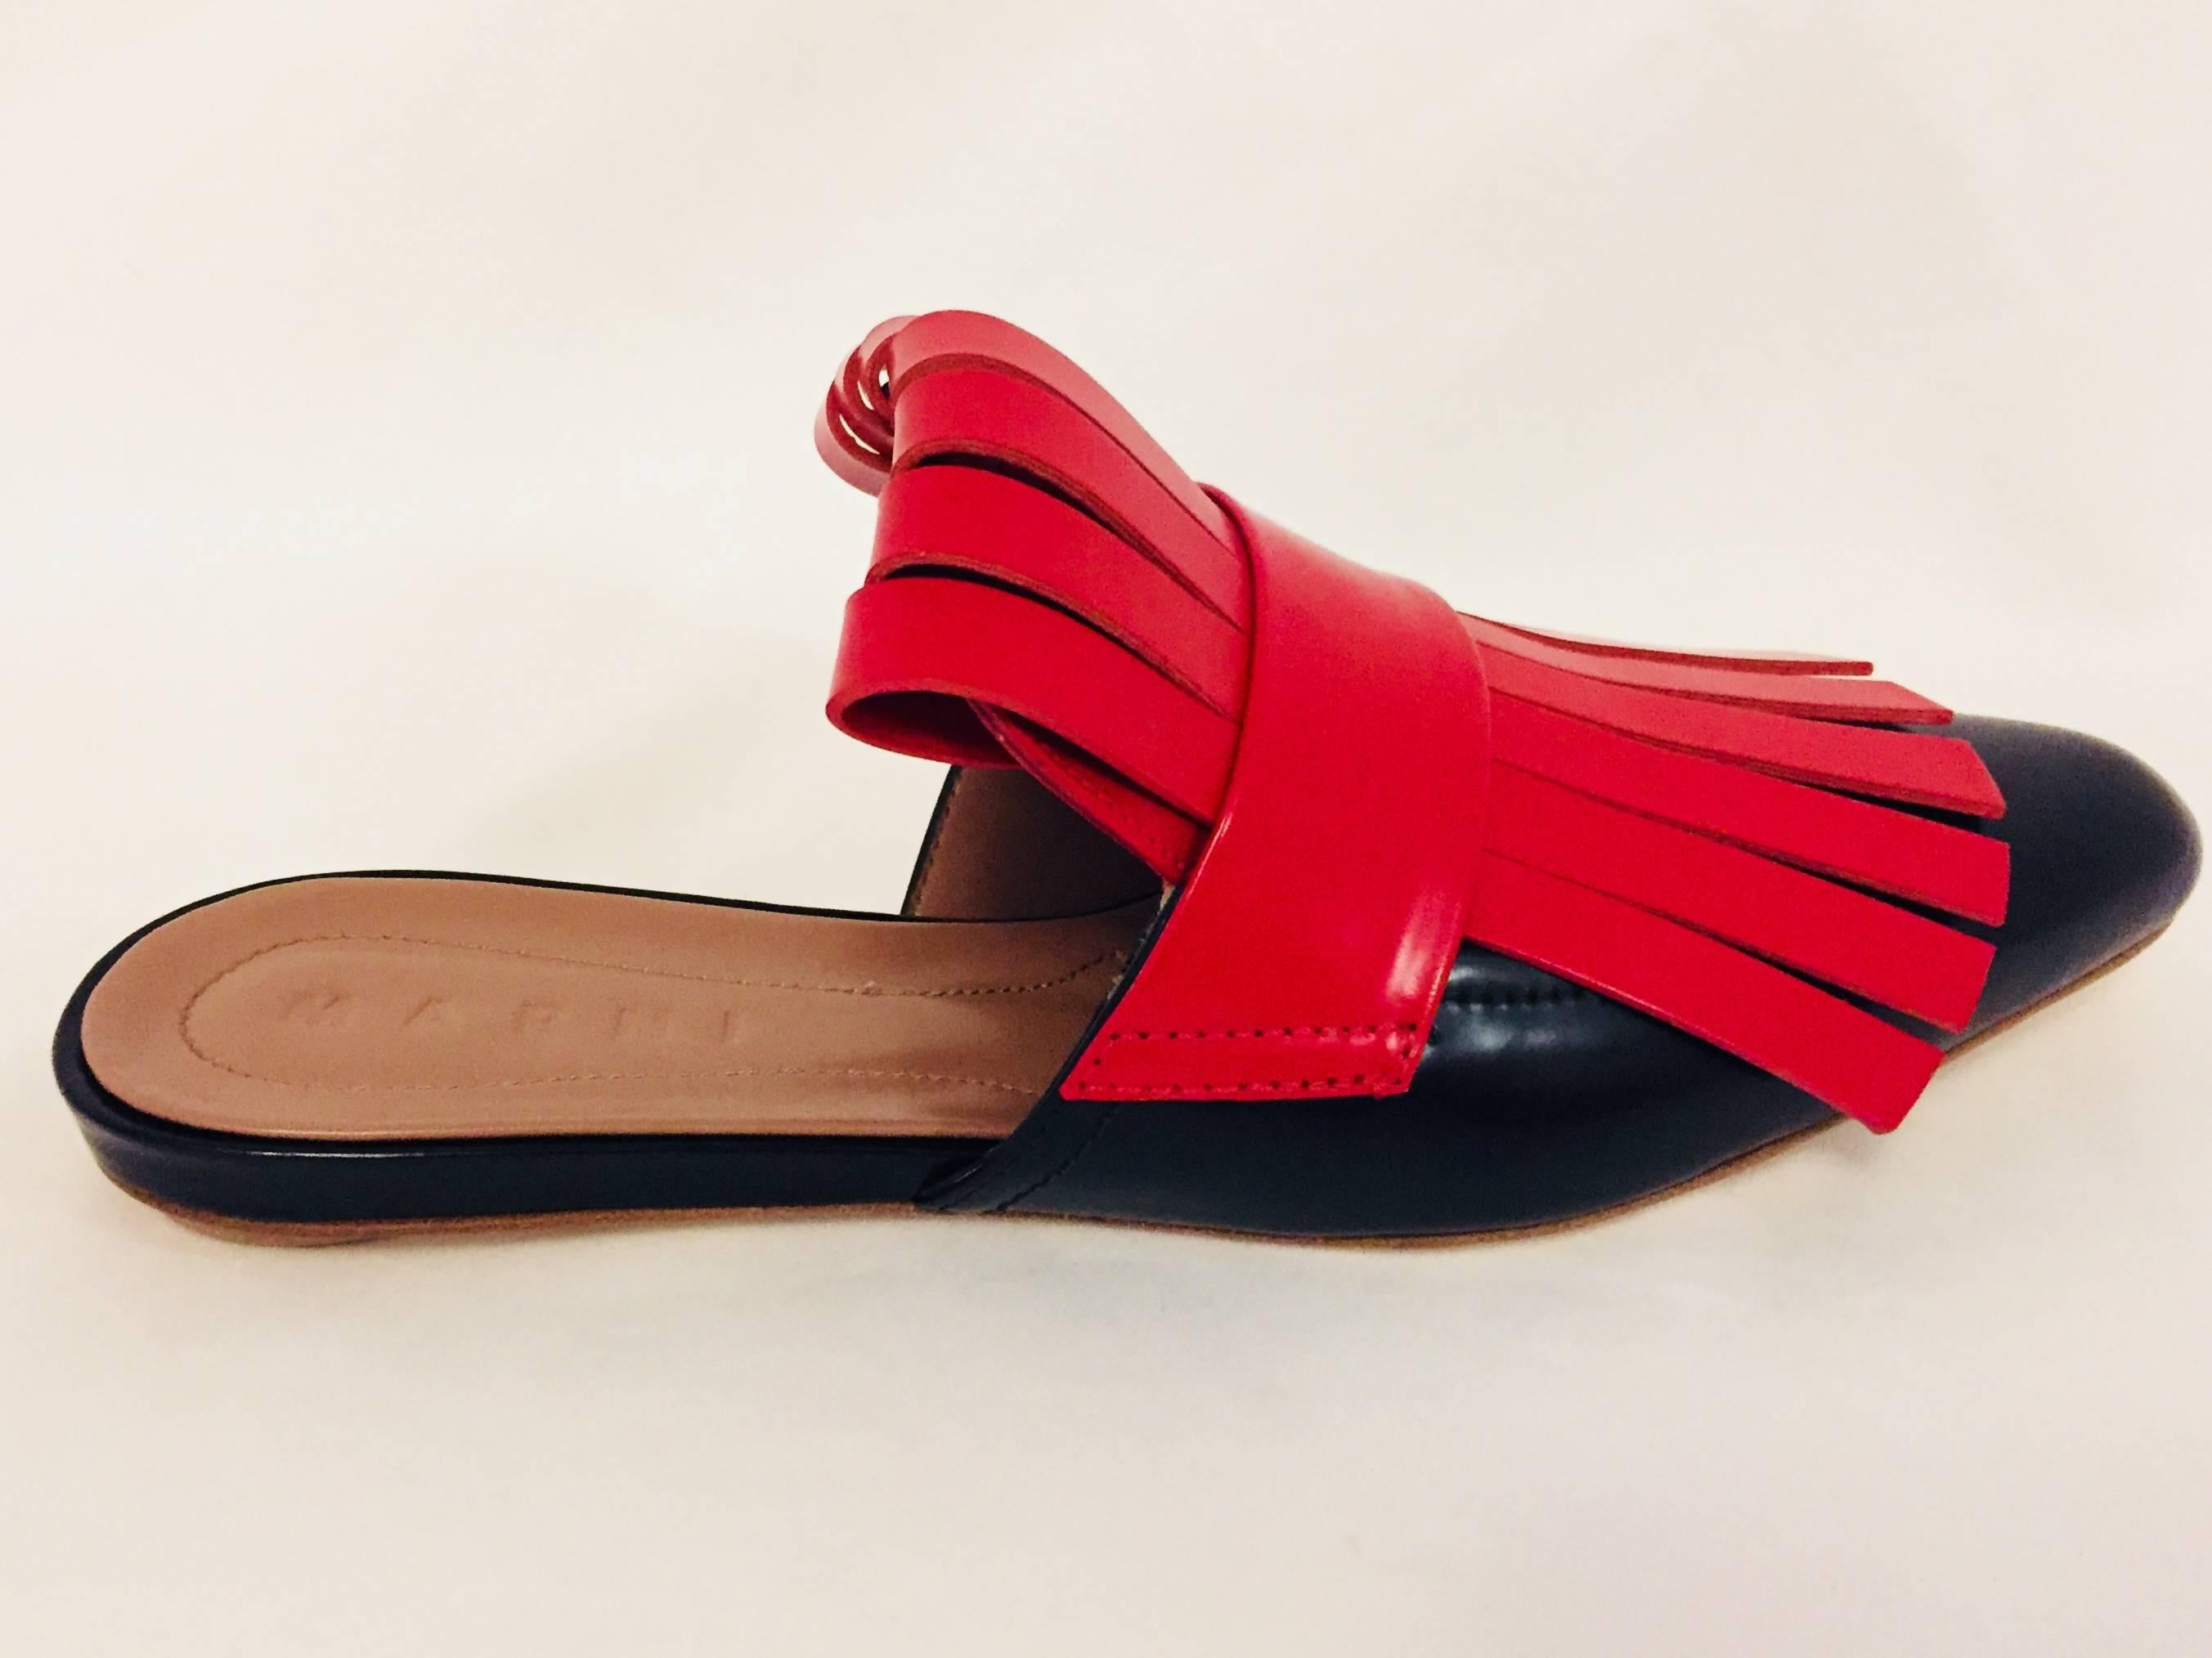 Marni's leather sandals in shiny black and bright red leather fringe. The mules are lined in taupe leather and the soles are also 100% leather.  Made in Italy.